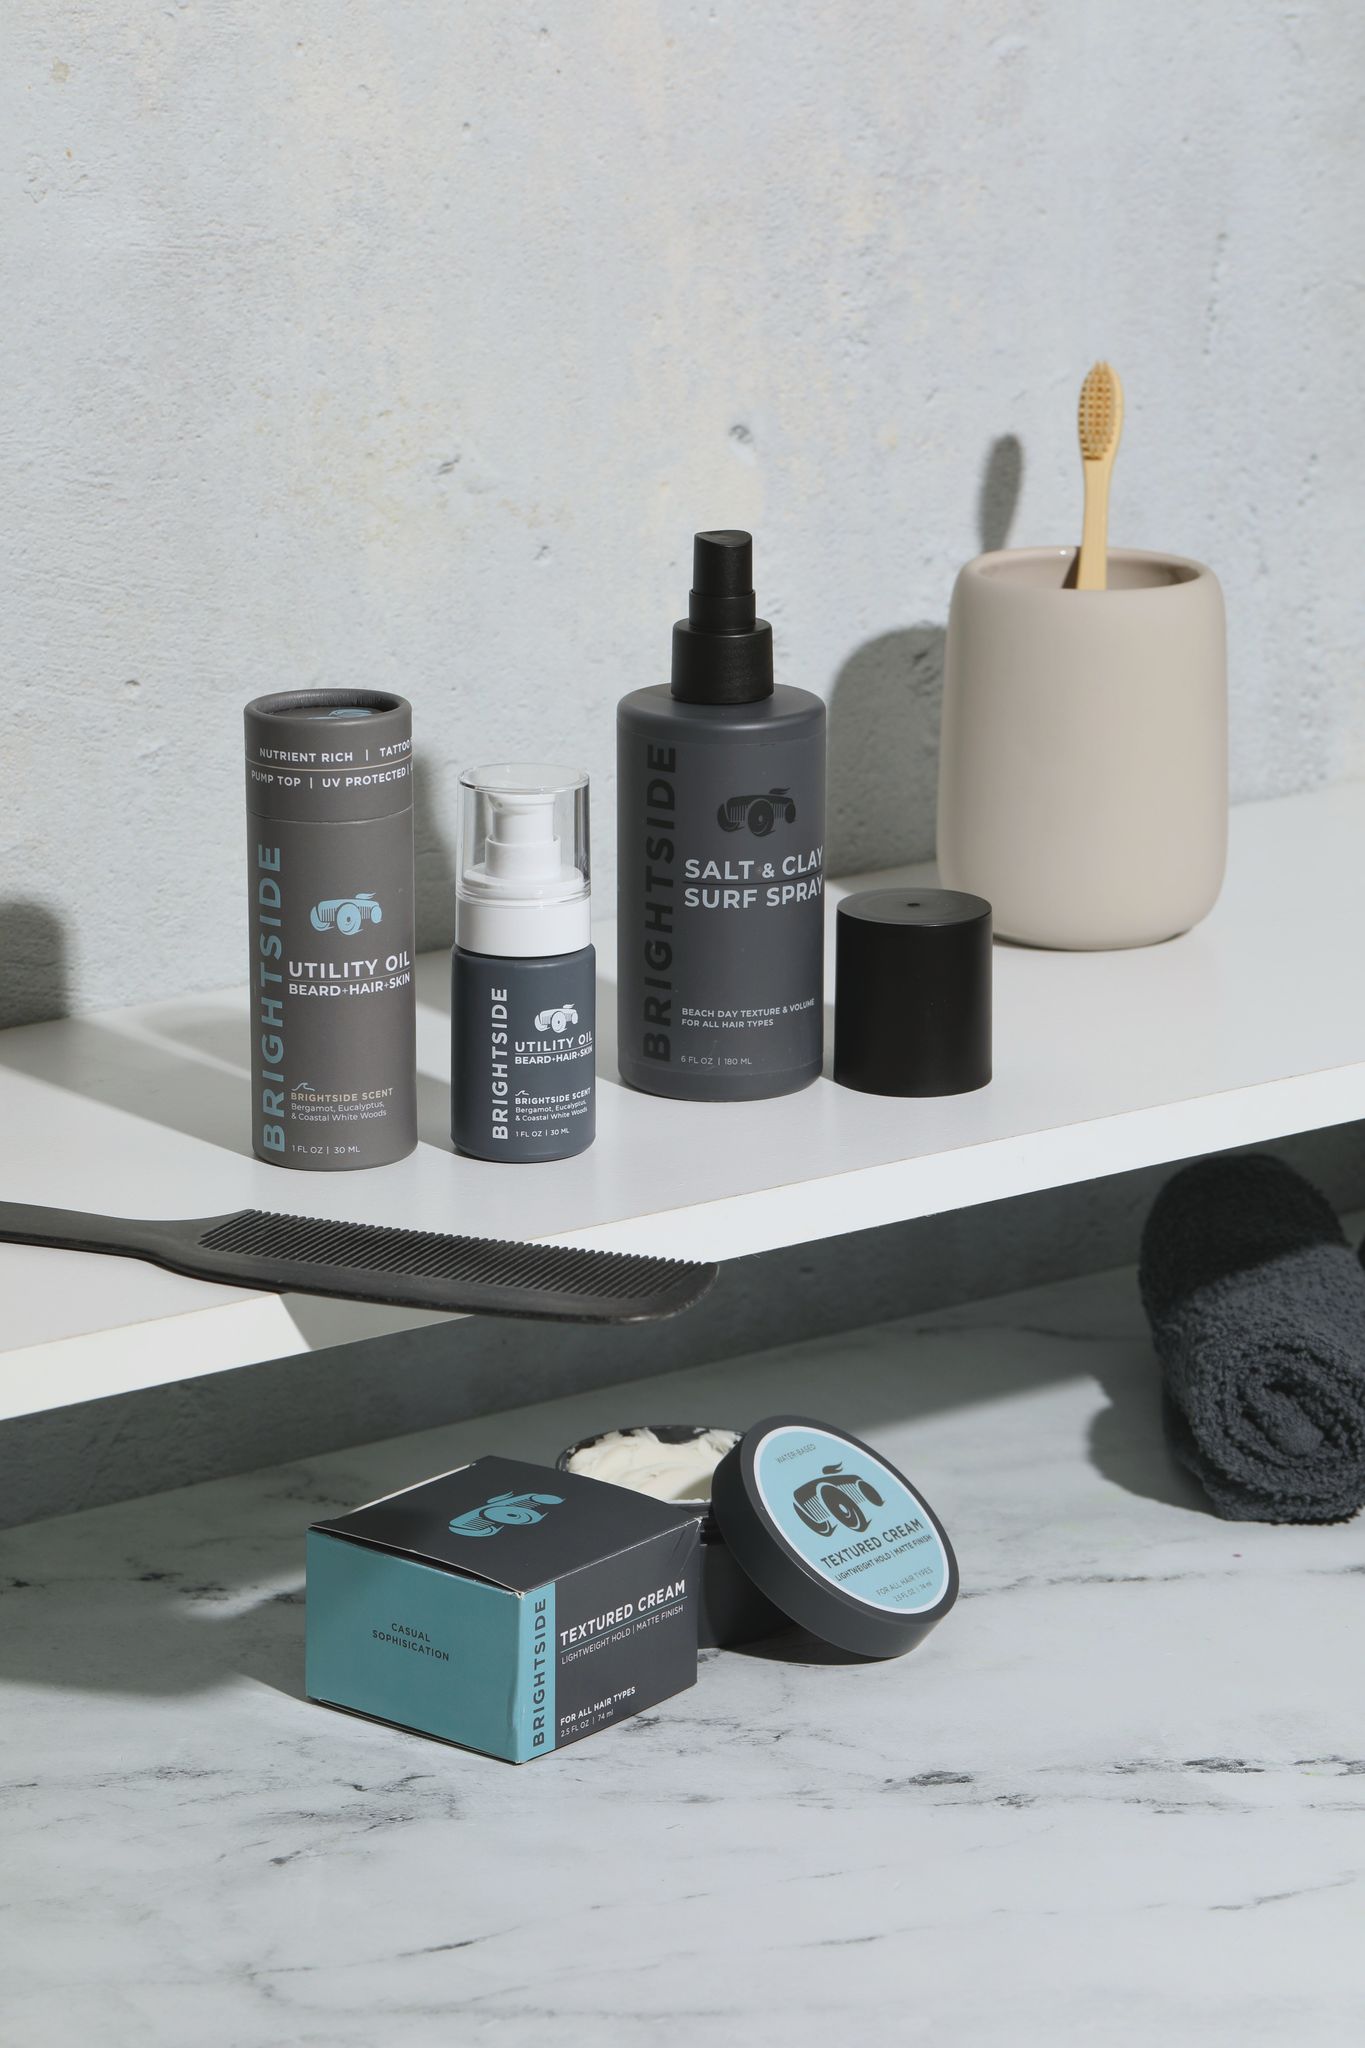 Brightside Barber styling and grooming products on bathroom shelf